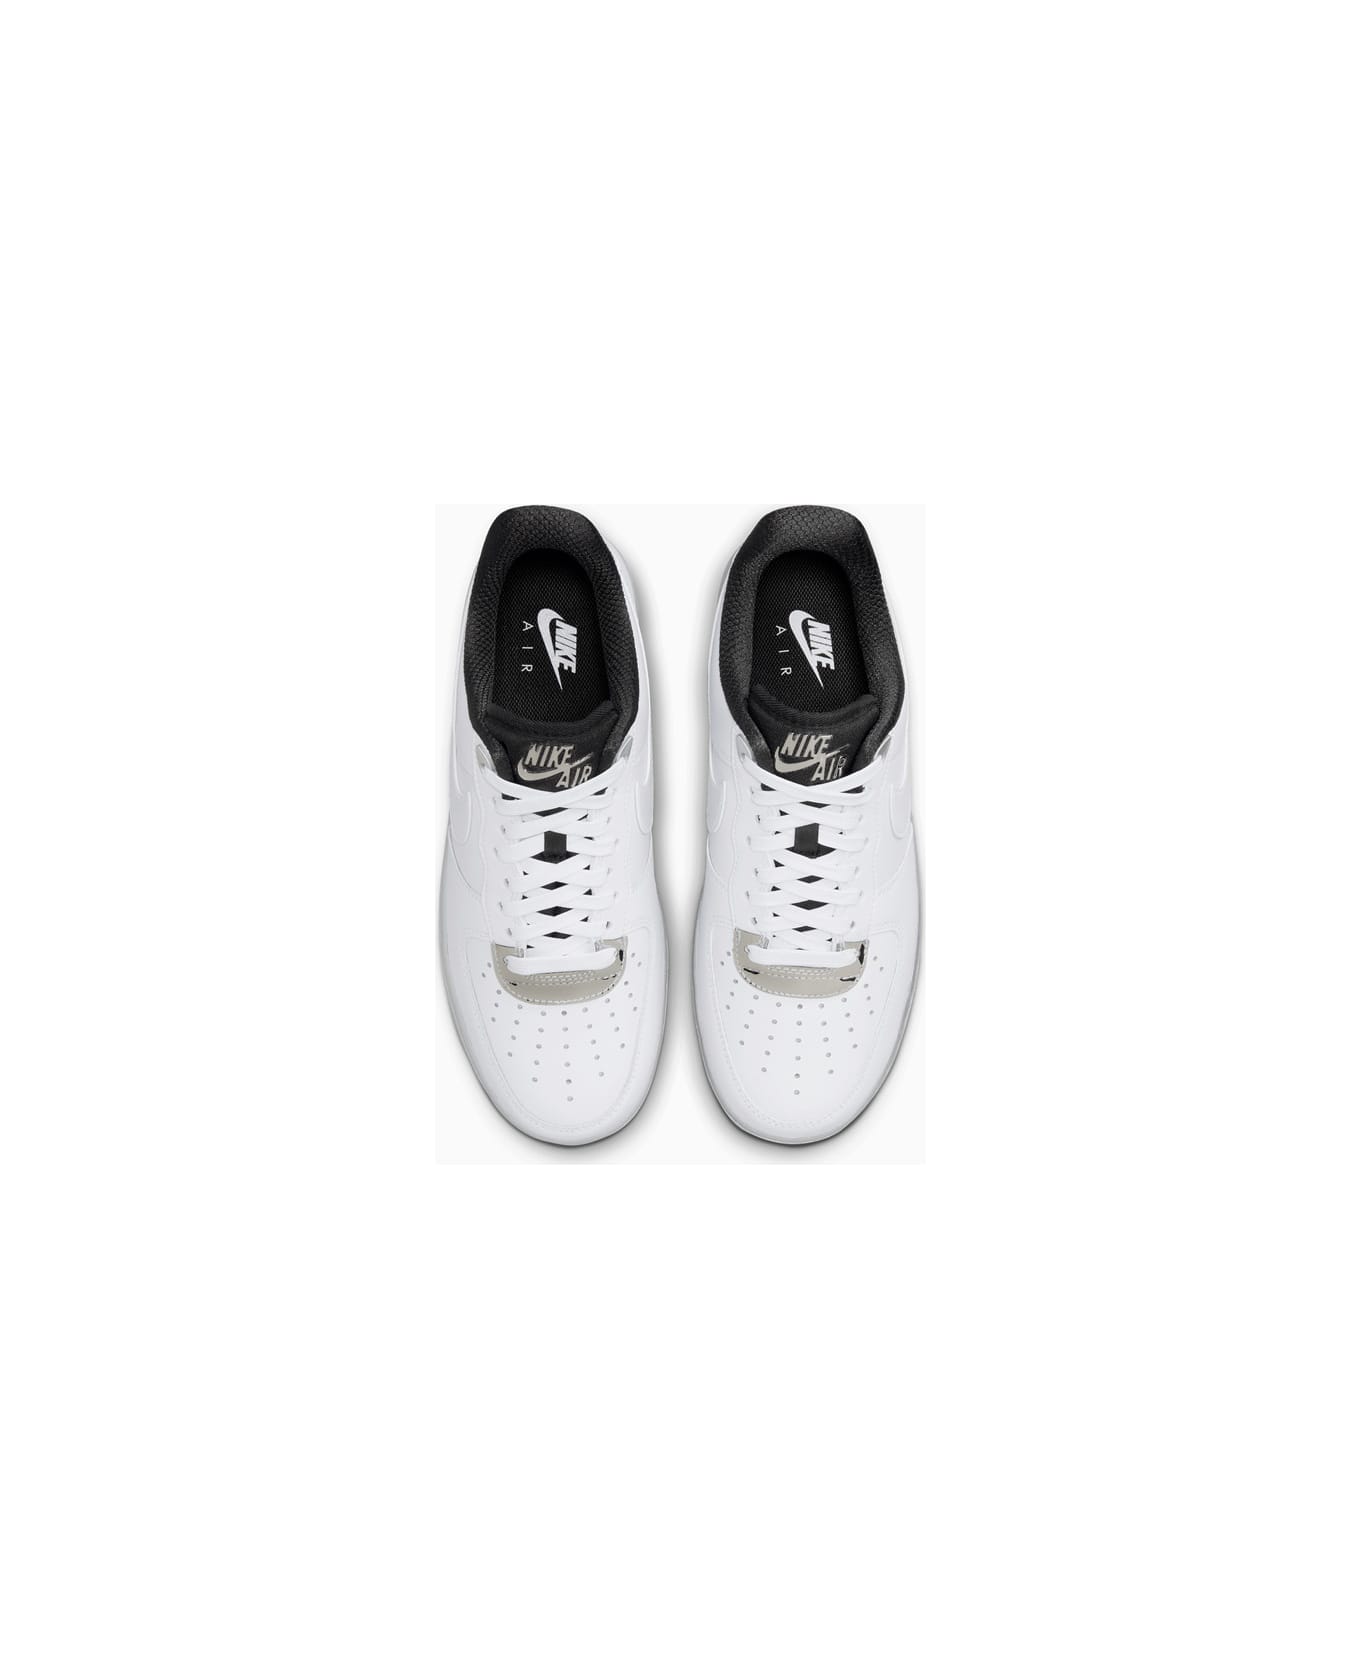 Nike Air Force 1 '07 Se (w) Sneakers Dx6764-100 - White